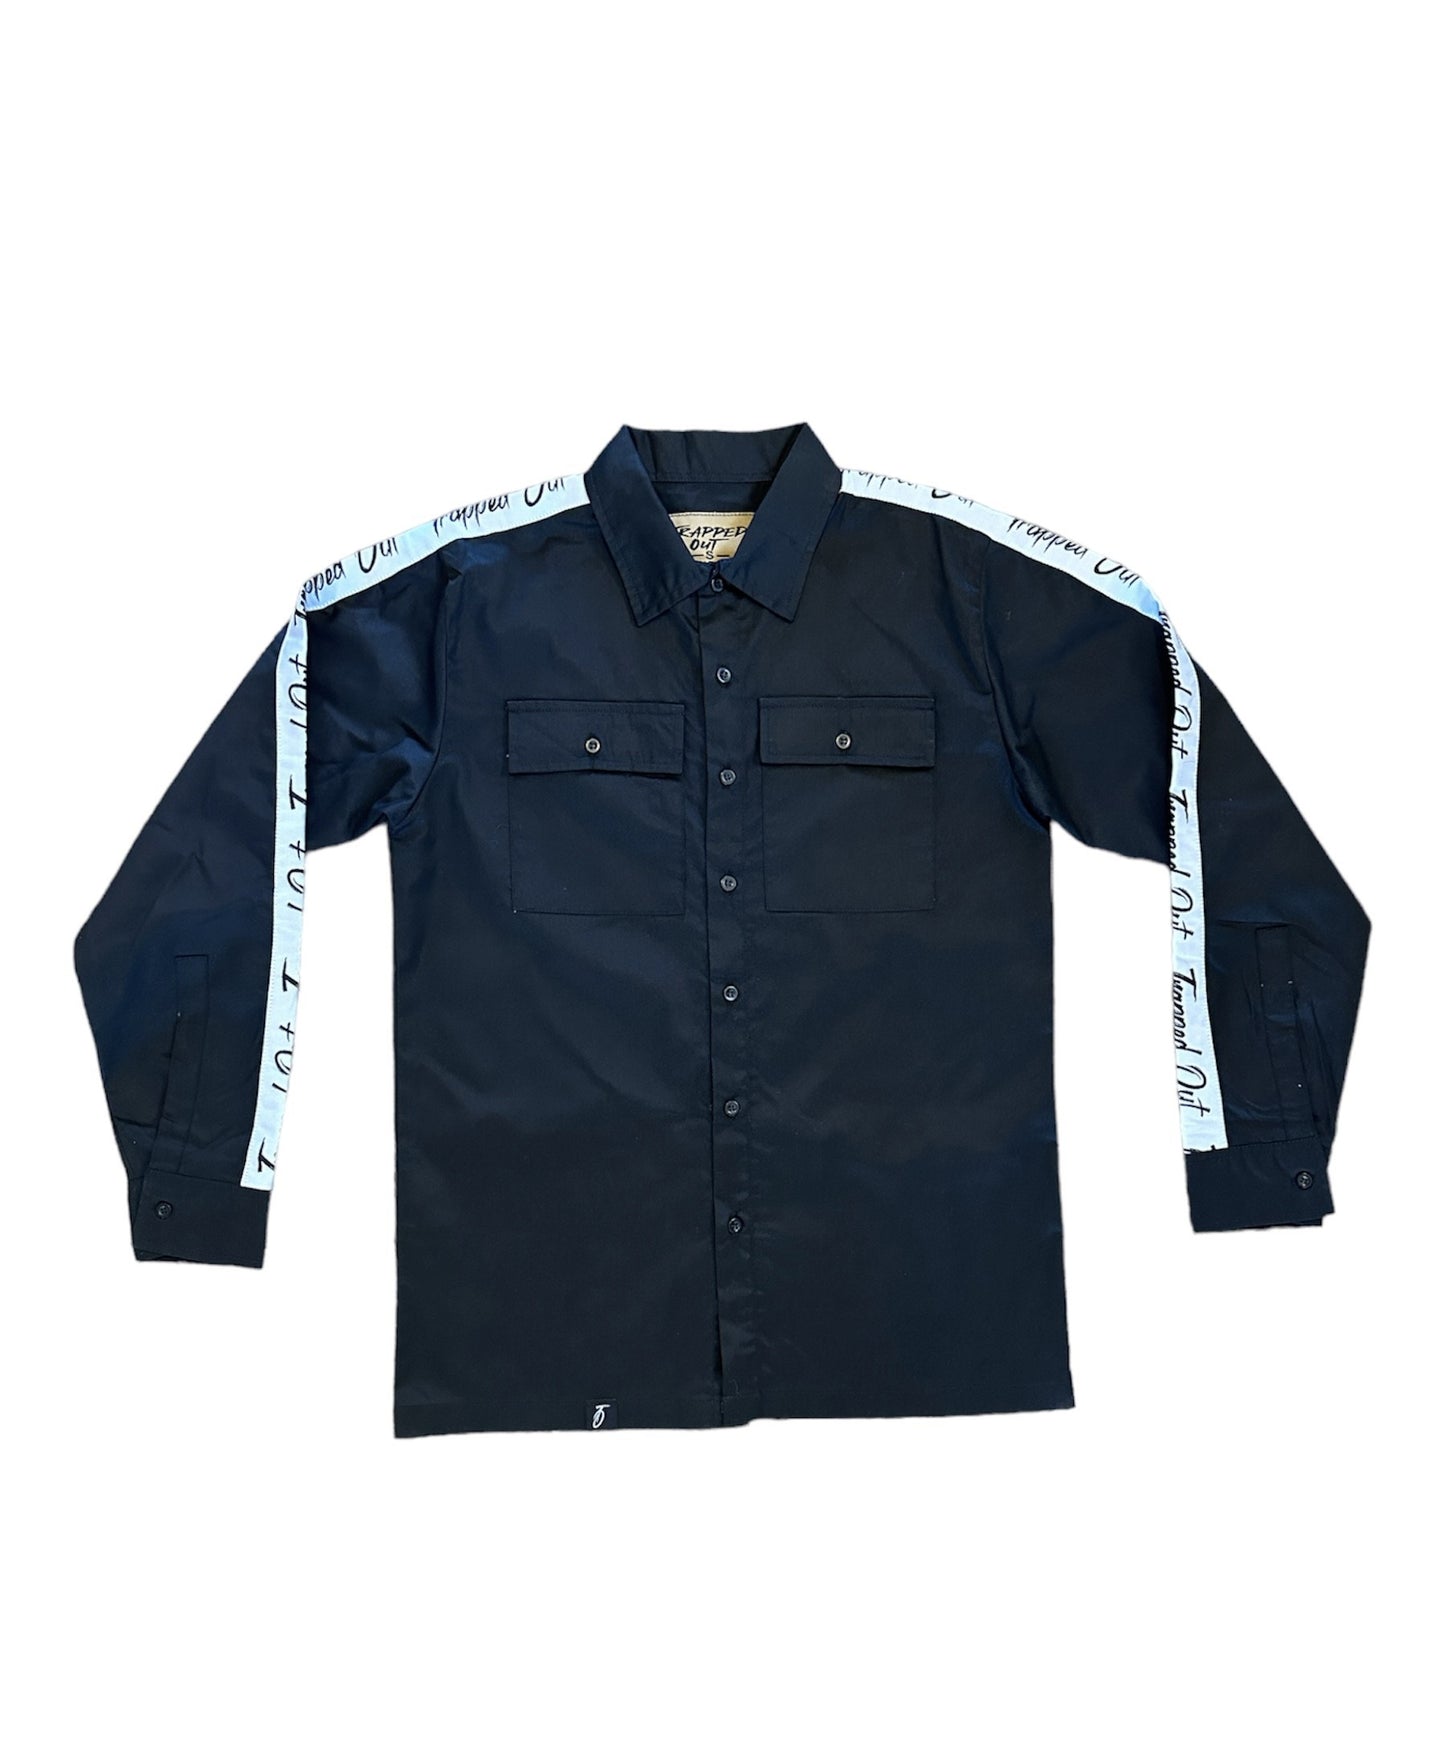 Black Long Sleeve Trapped Out Dickie Shirt